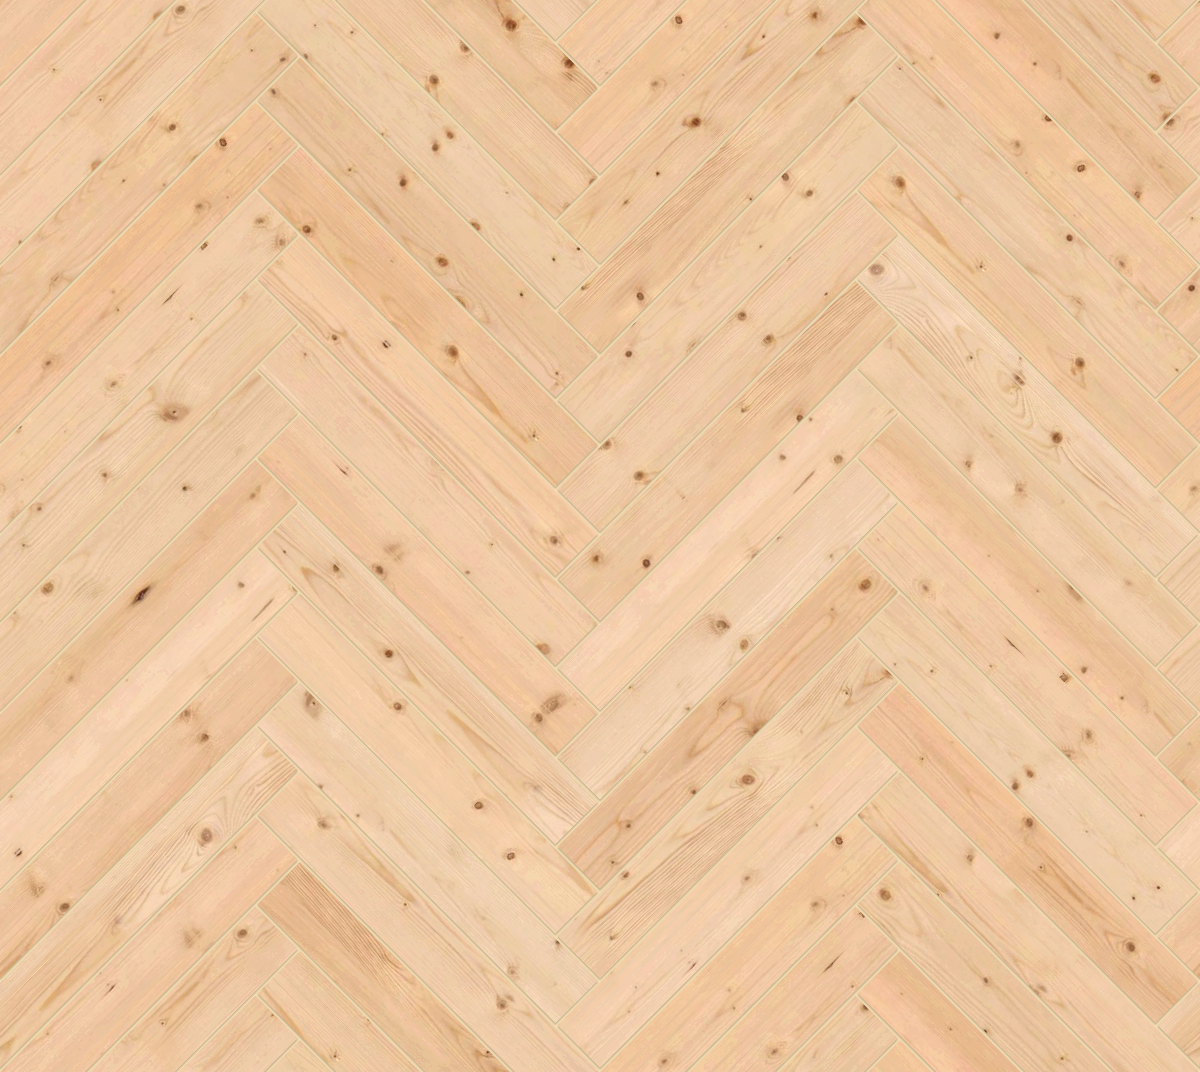 A seamless wood texture with knotted timber boards arranged in a Herringbone pattern